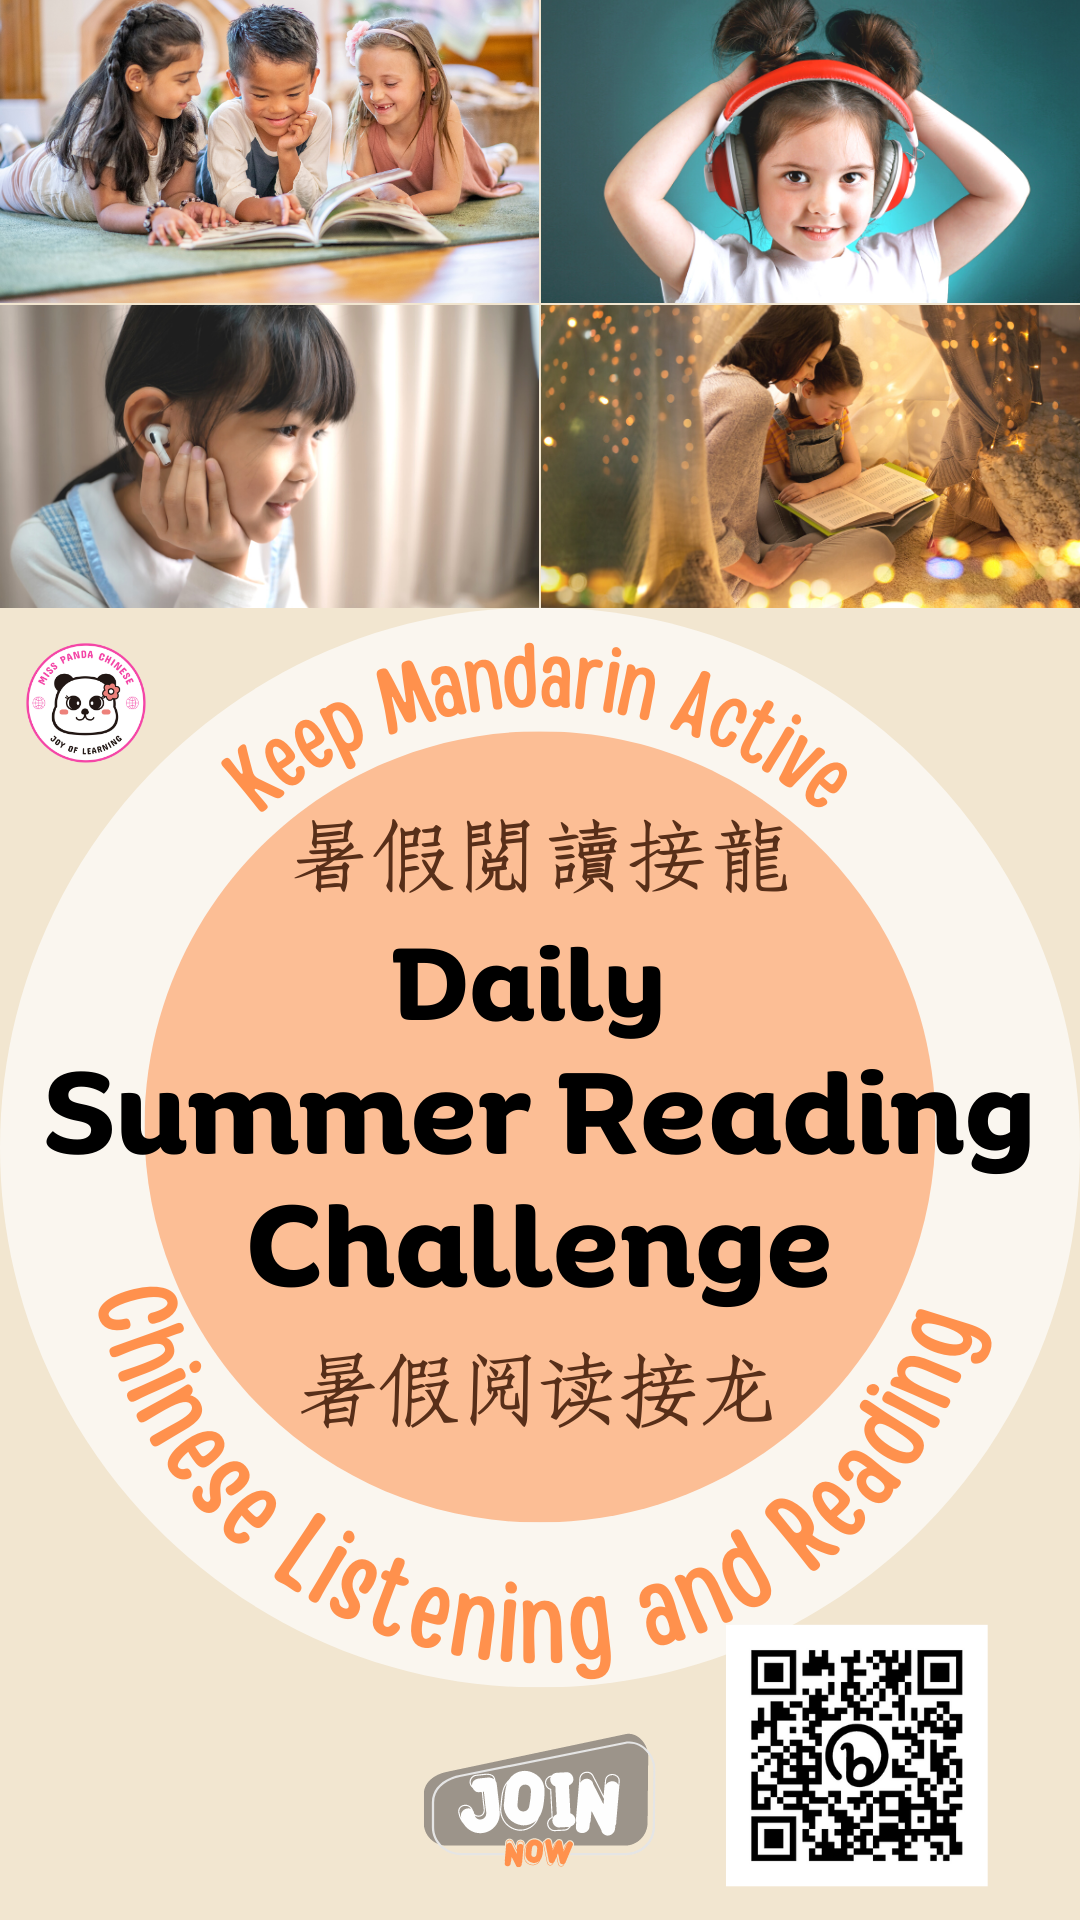 Daily Summer Reading and Listening | MissPandaChinese.com